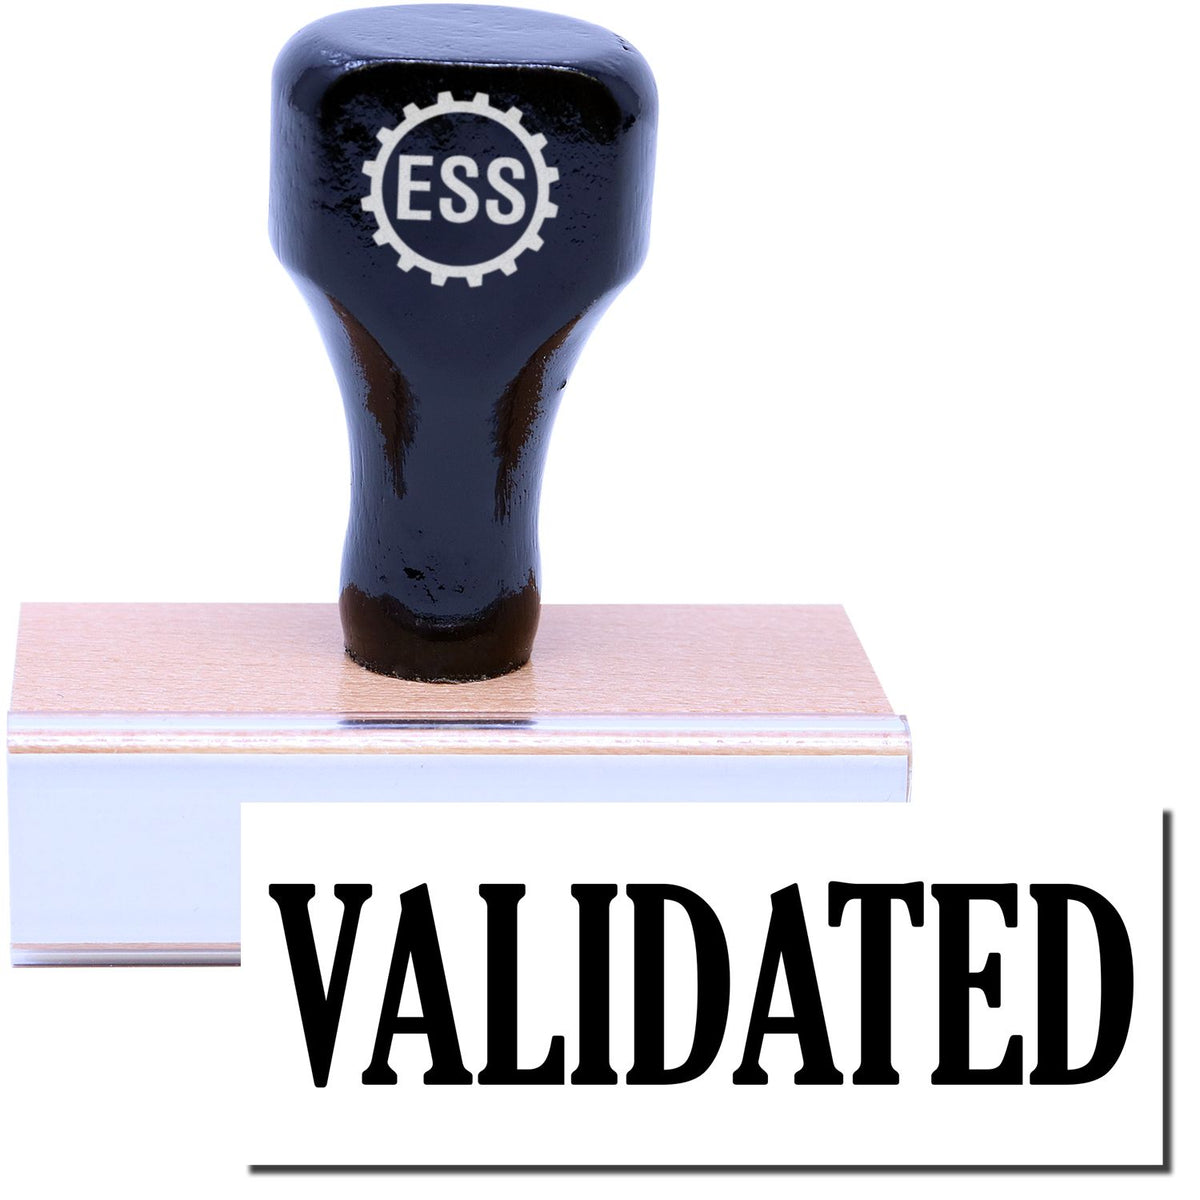 A stock office rubber stamp with a stamped image showing how the text &quot;VALIDATED&quot; is displayed after stamping.